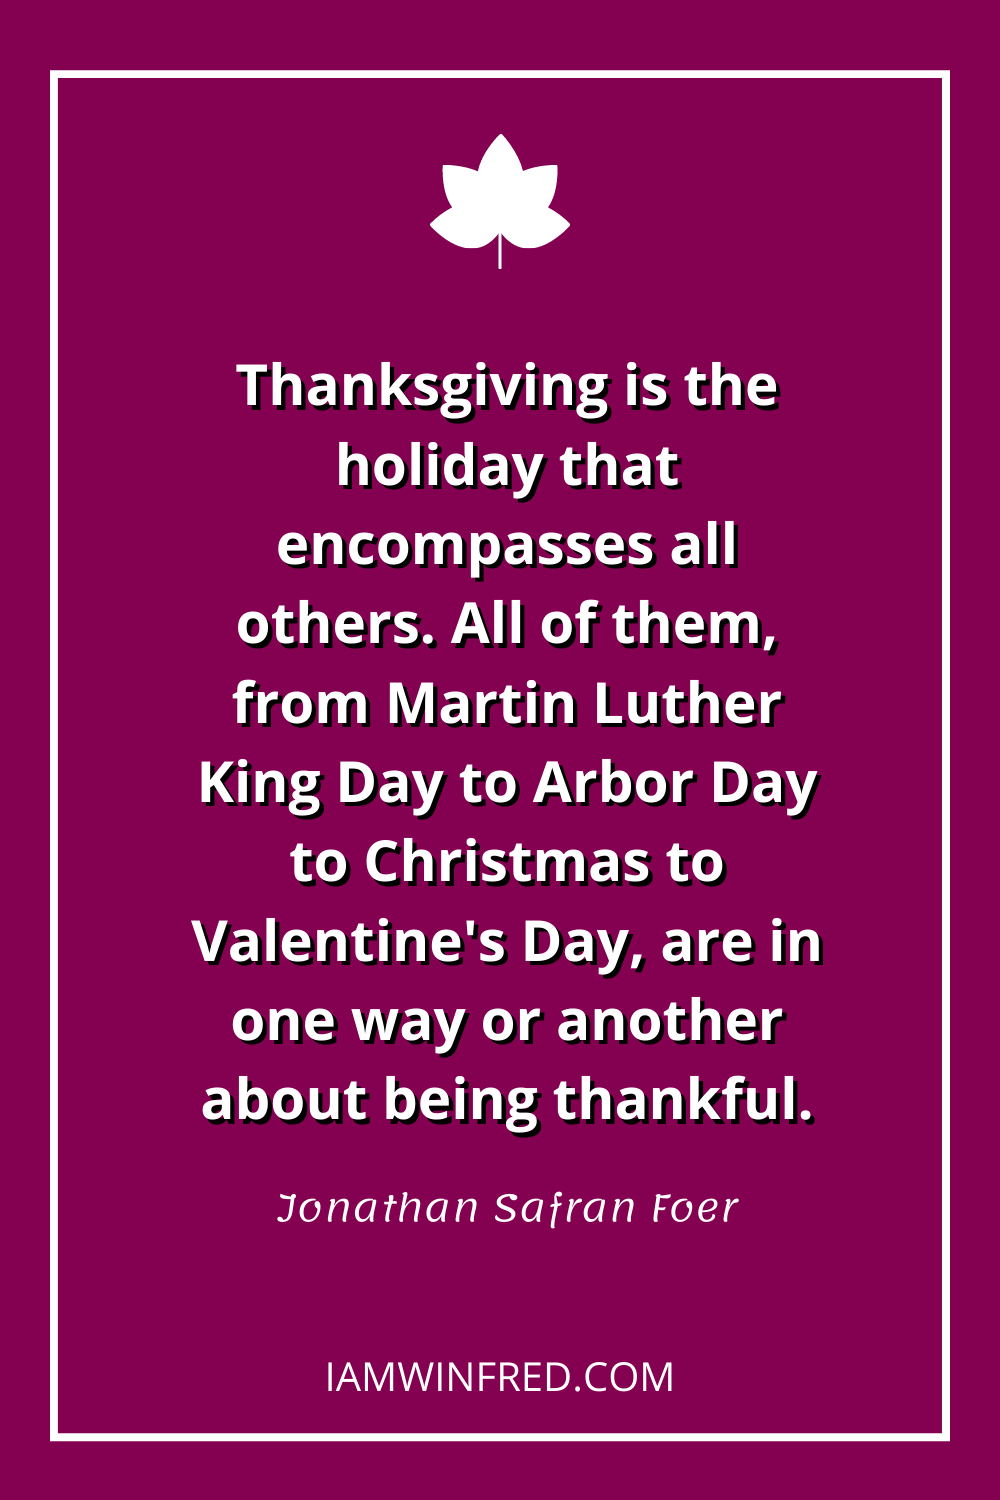 Thanksgiving Is The Holiday That Encompasses All Others. All Of Them From Martin Luther King Day To Arbor Day To Christmas To Valentines Day Are In One Way Or Another About Being Thankful